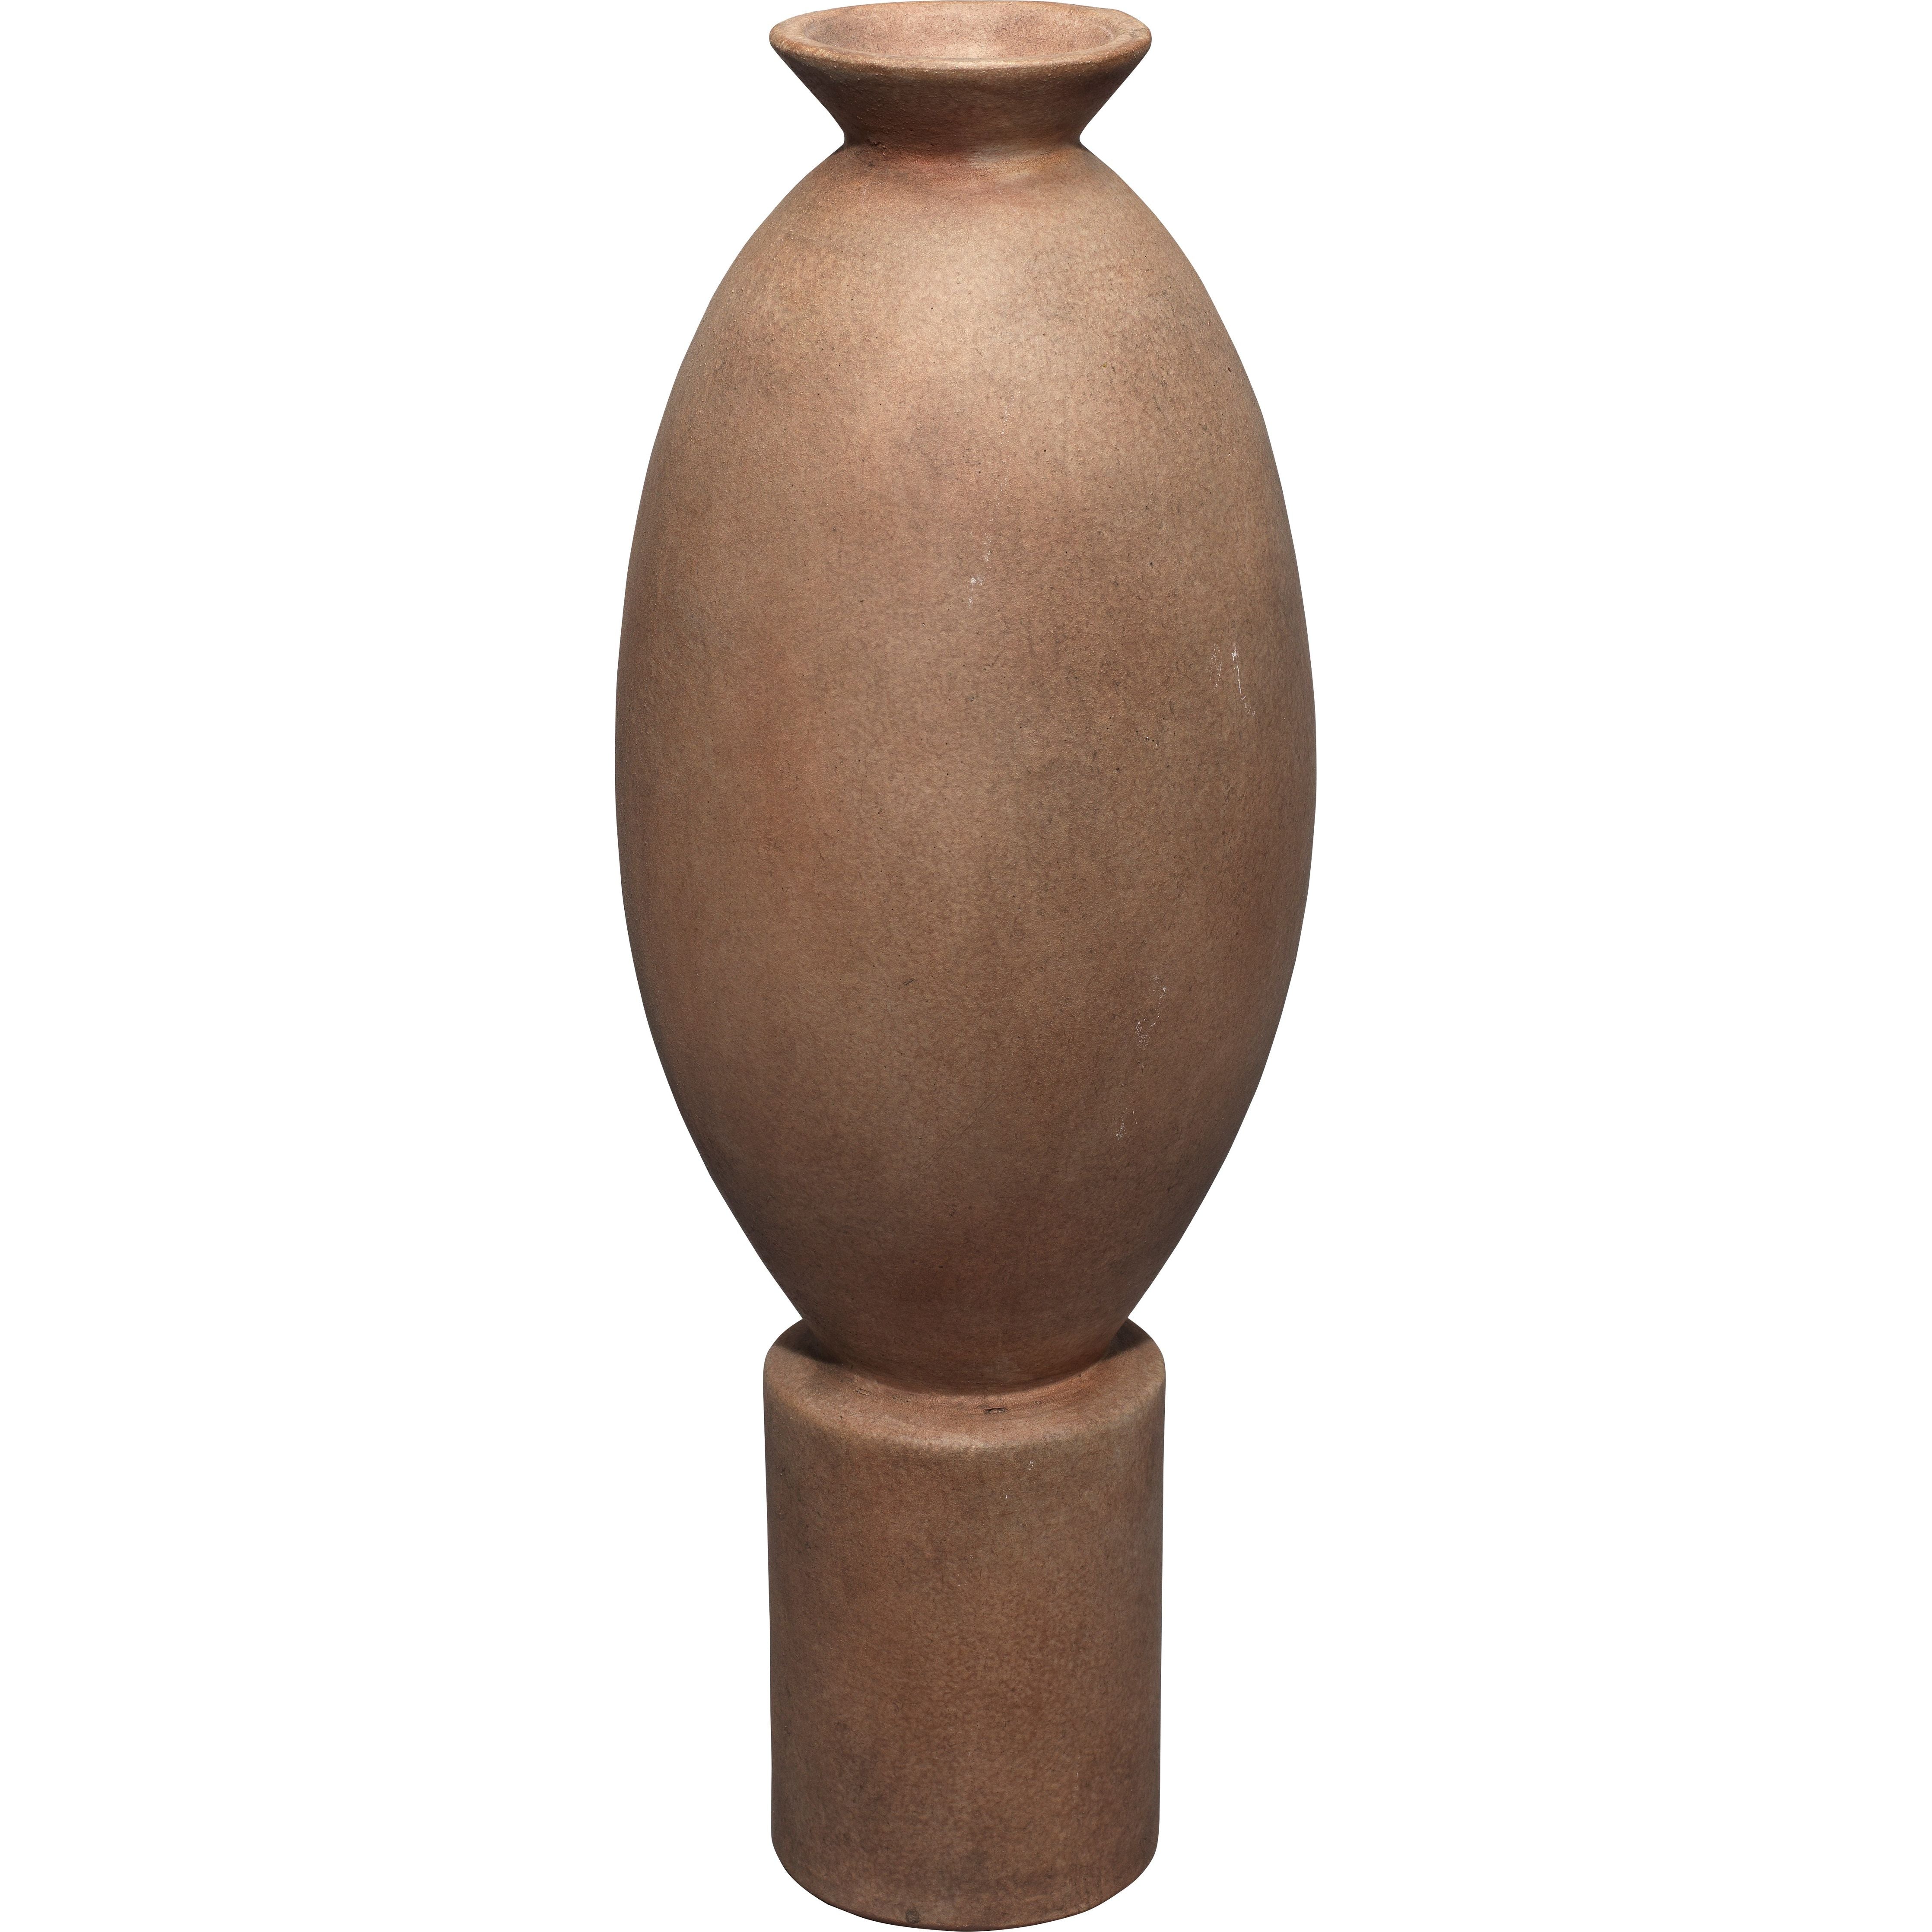 Jamie Young Company - 7ELEV-VAUM - Elevated Decorative Vase - Elevated - Brown